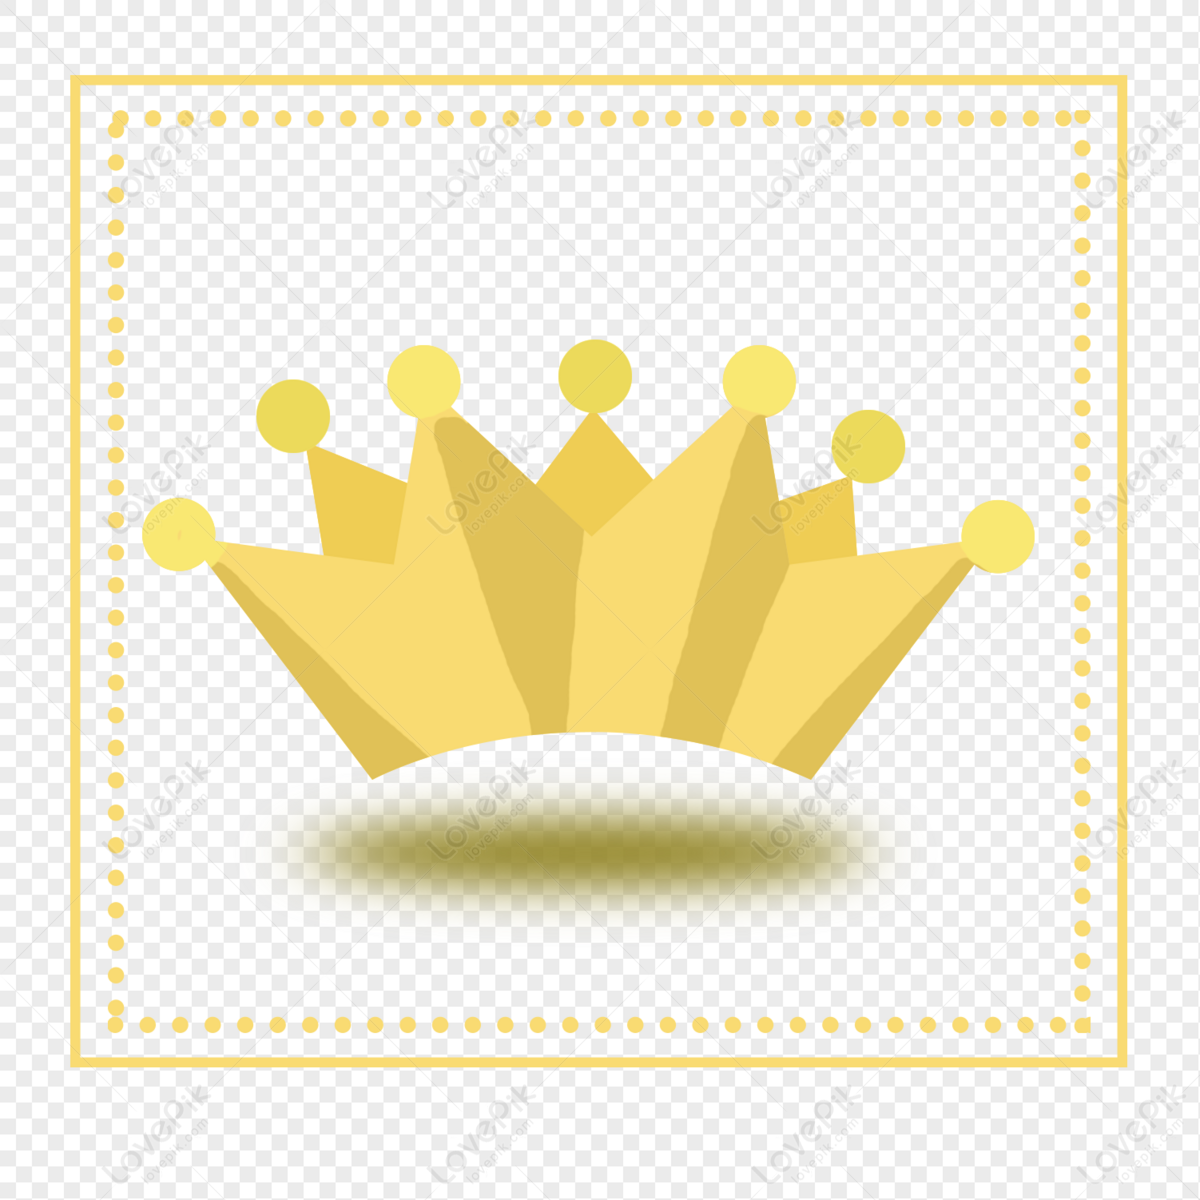 Golden Cartoon Crown PNG Hd Transparent Image And Clipart Image For Free  Download - Lovepik | 401539994